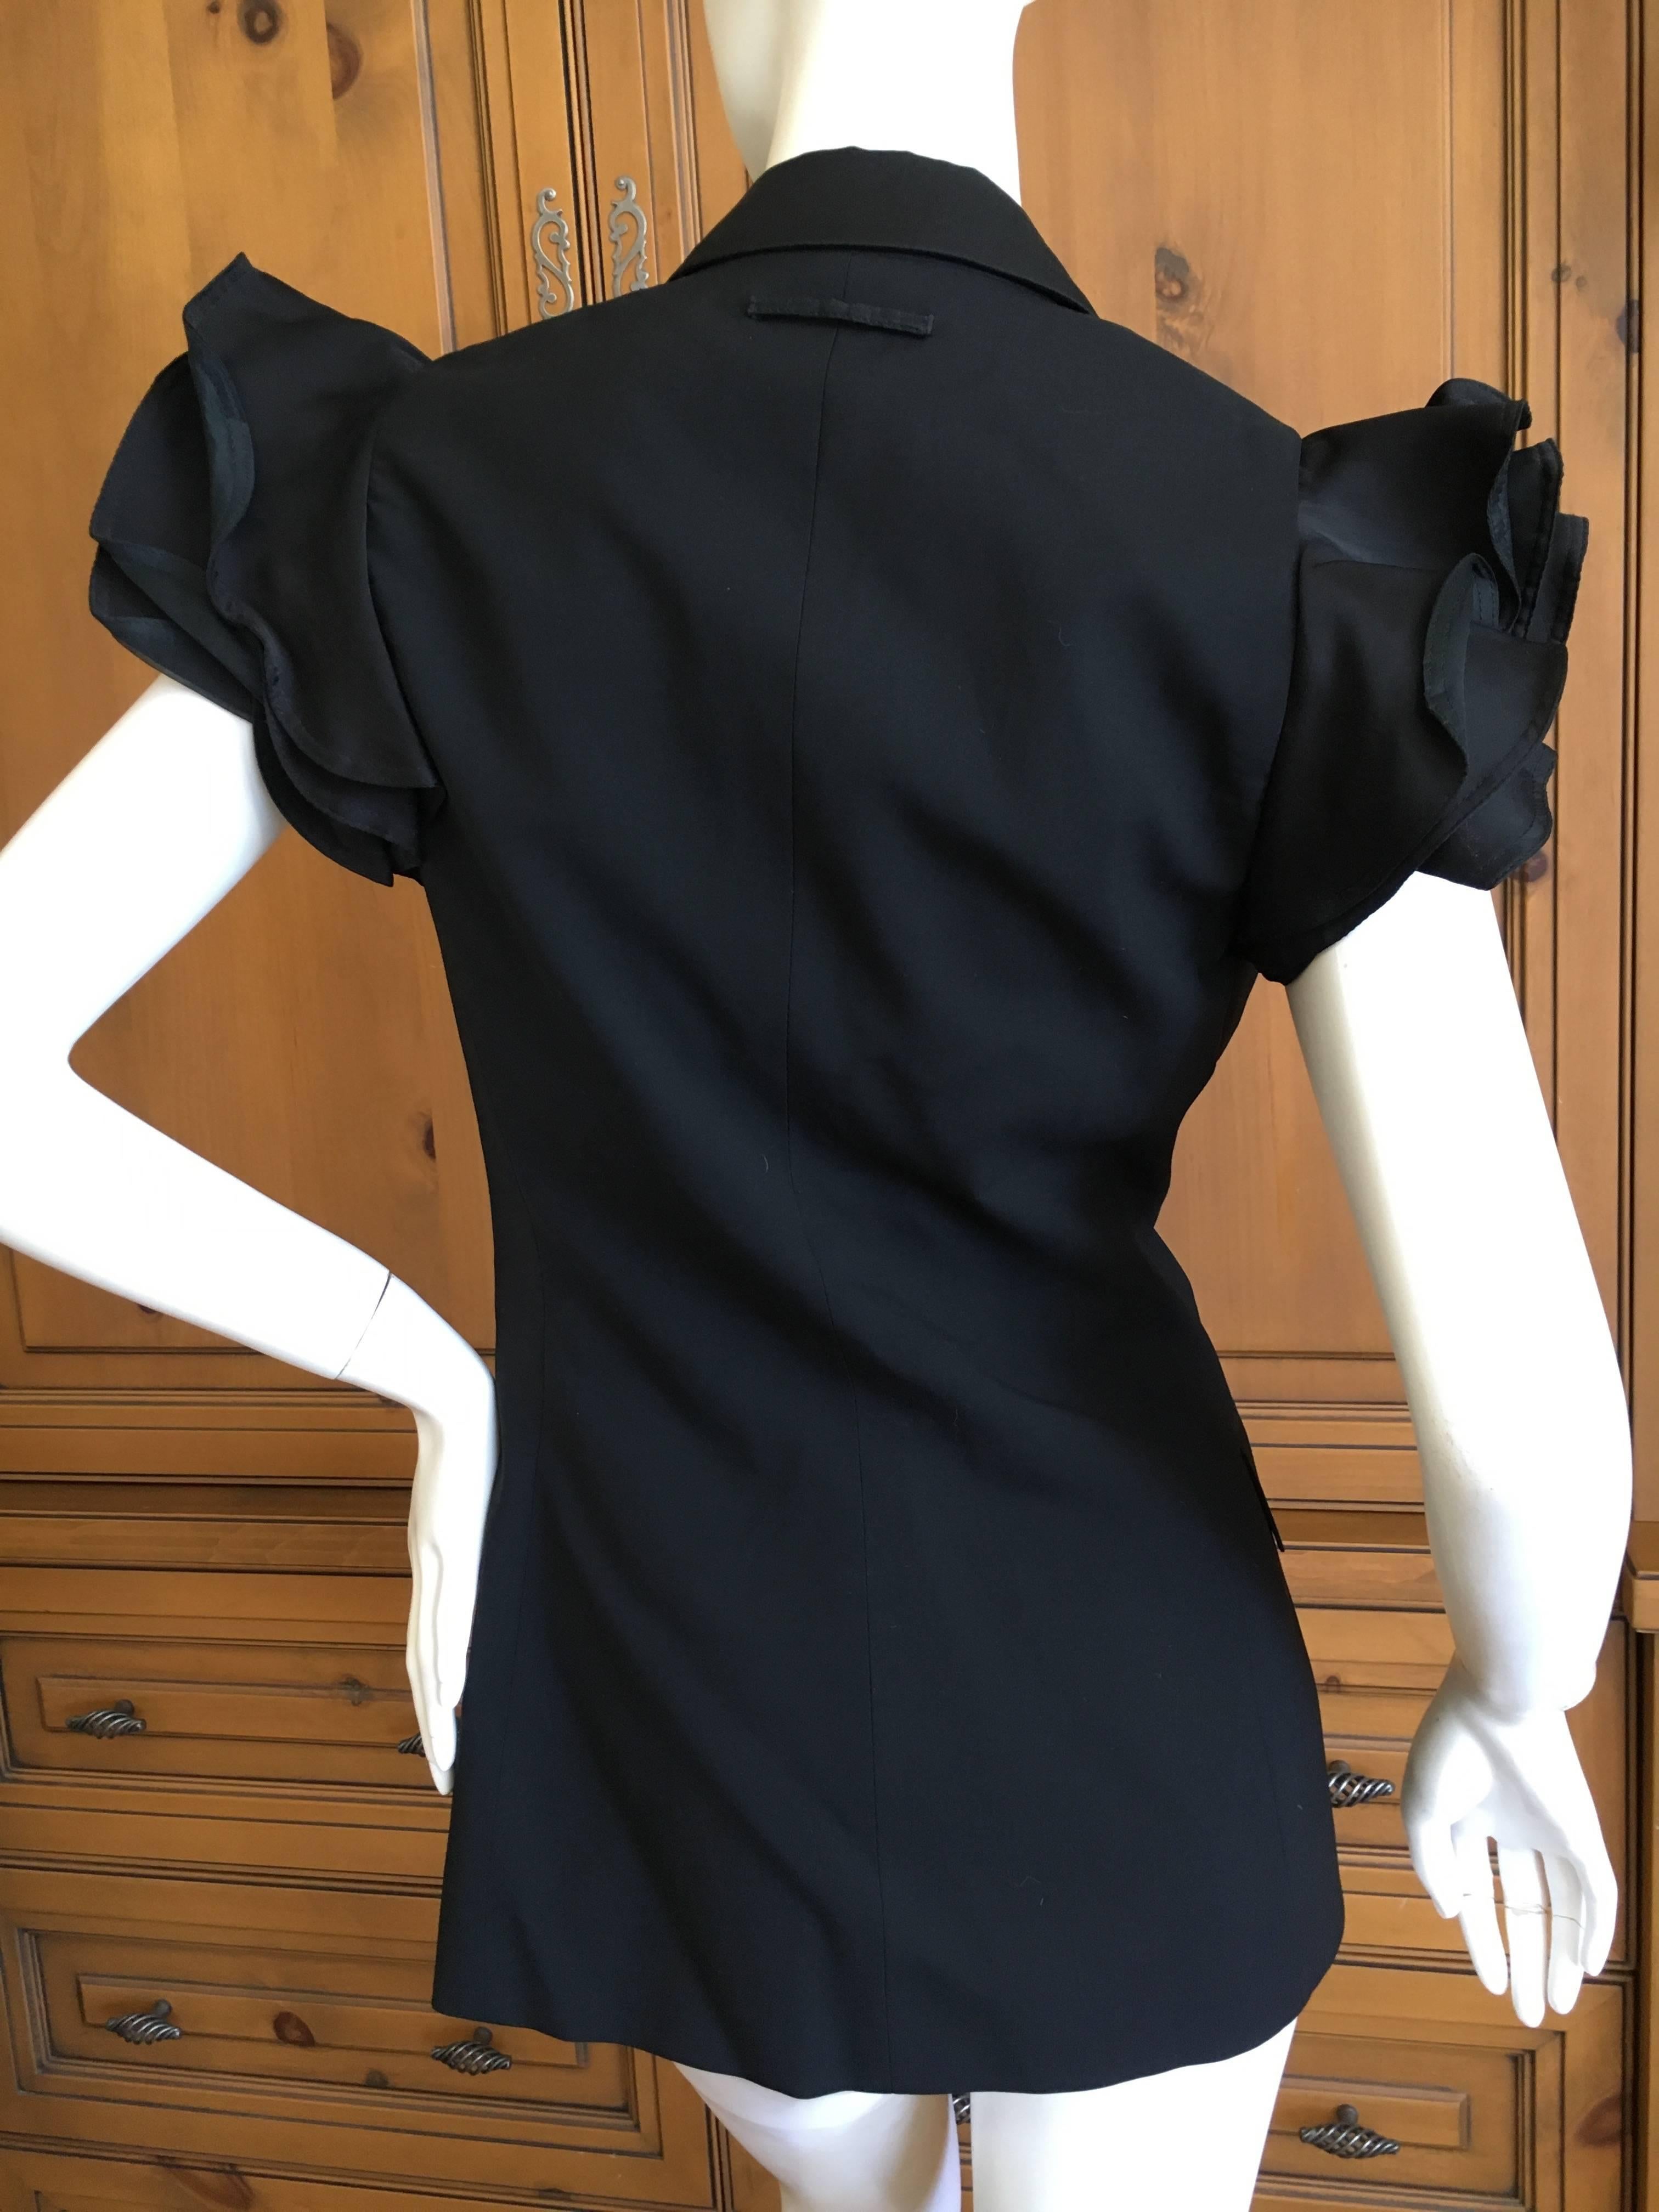 Jean Paul Gaultier Vintage Black Sleeveless Double Breasted Jacket with Ruffles For Sale 3